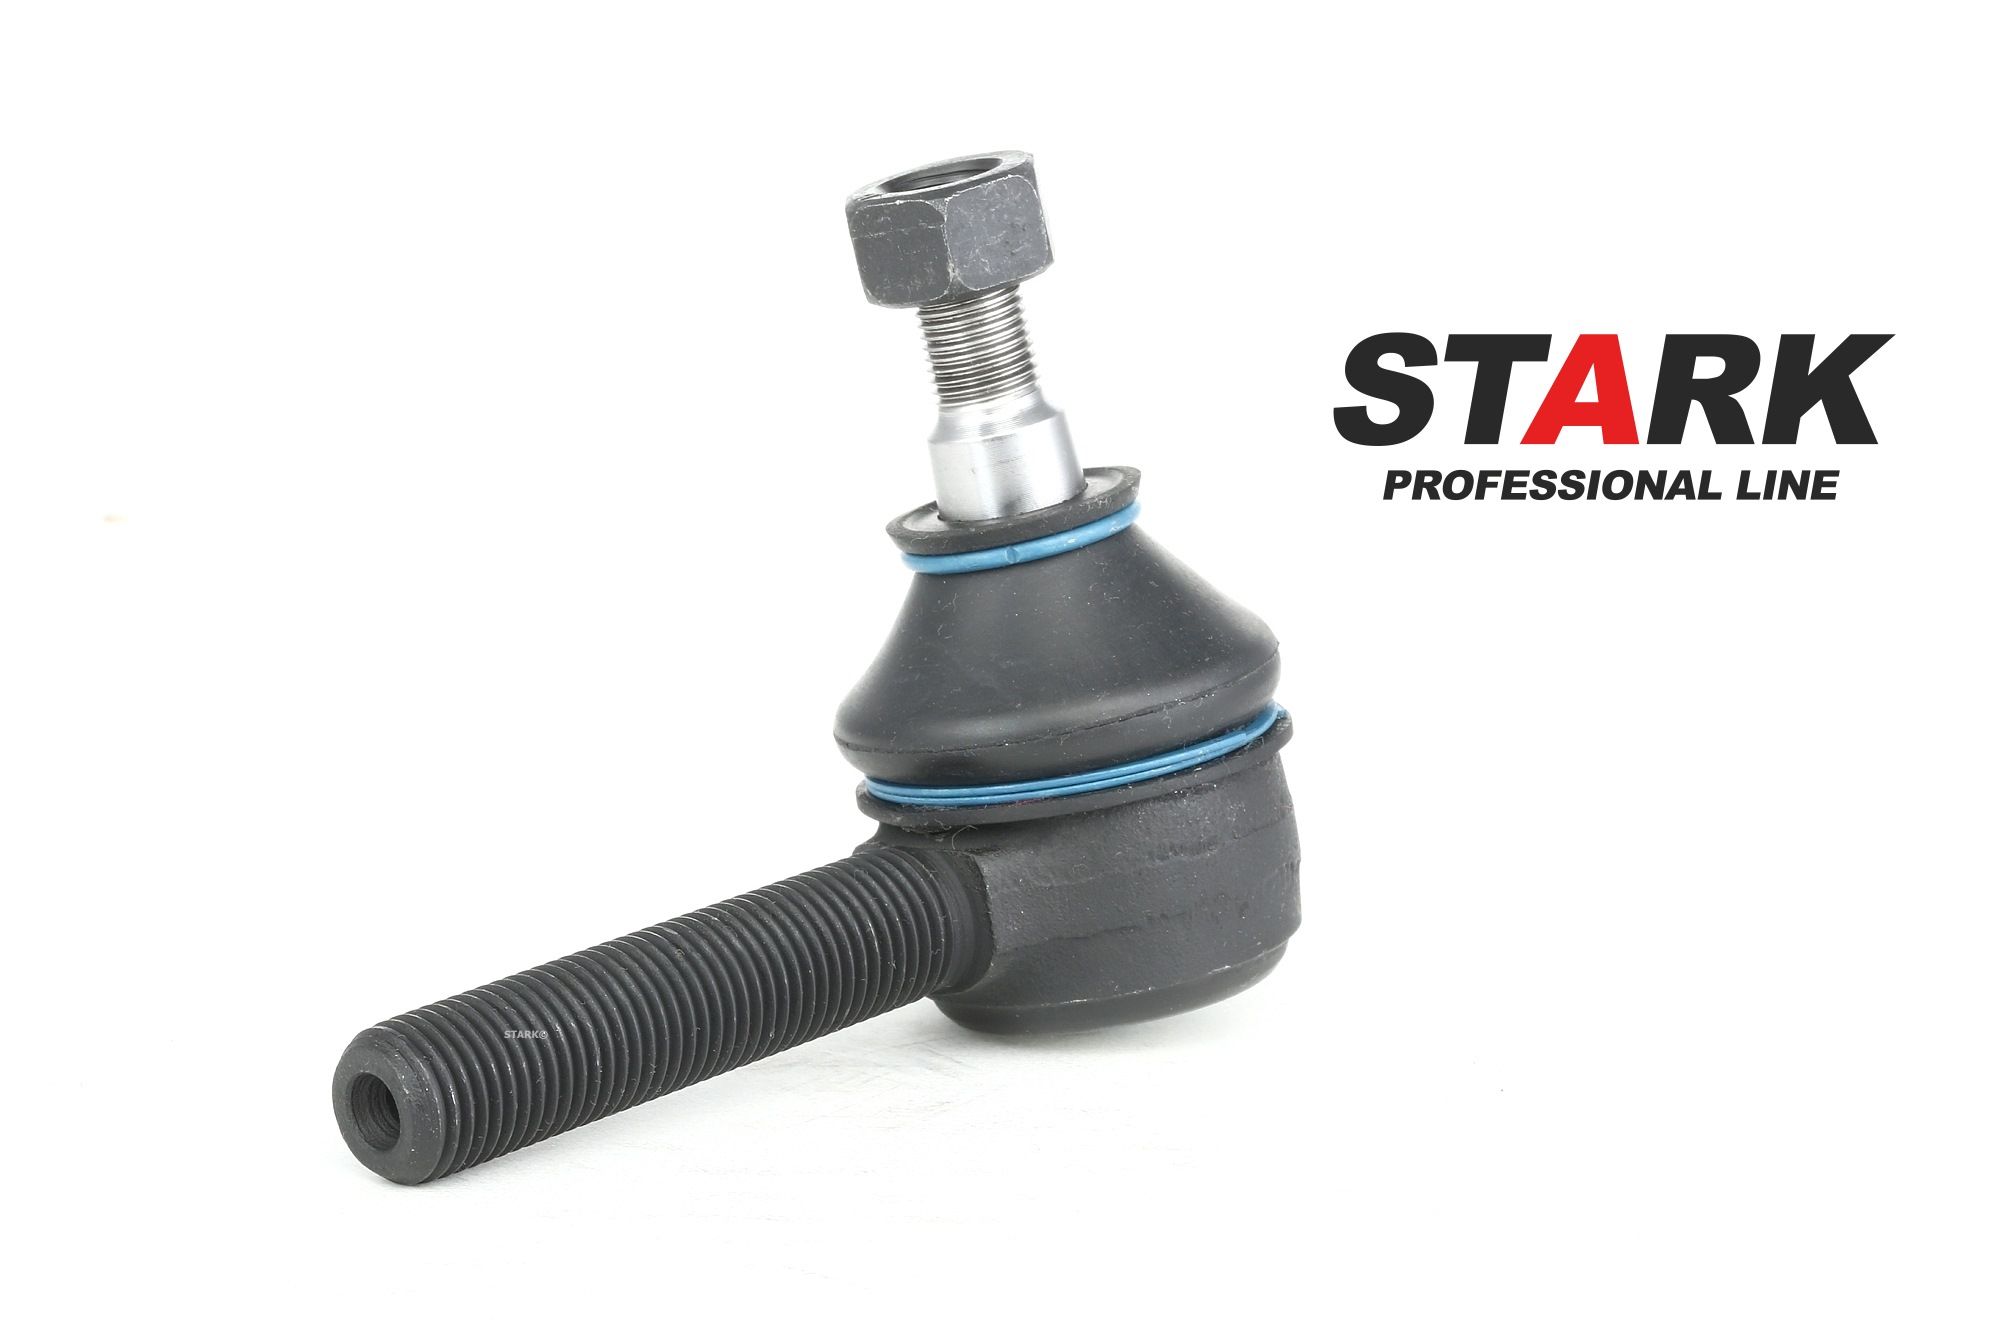 STARK SKTE-0280080 Track rod end Cone Size 12,5 mm, M14 x 1,5, M10 x 1 mm, Front axle both sides